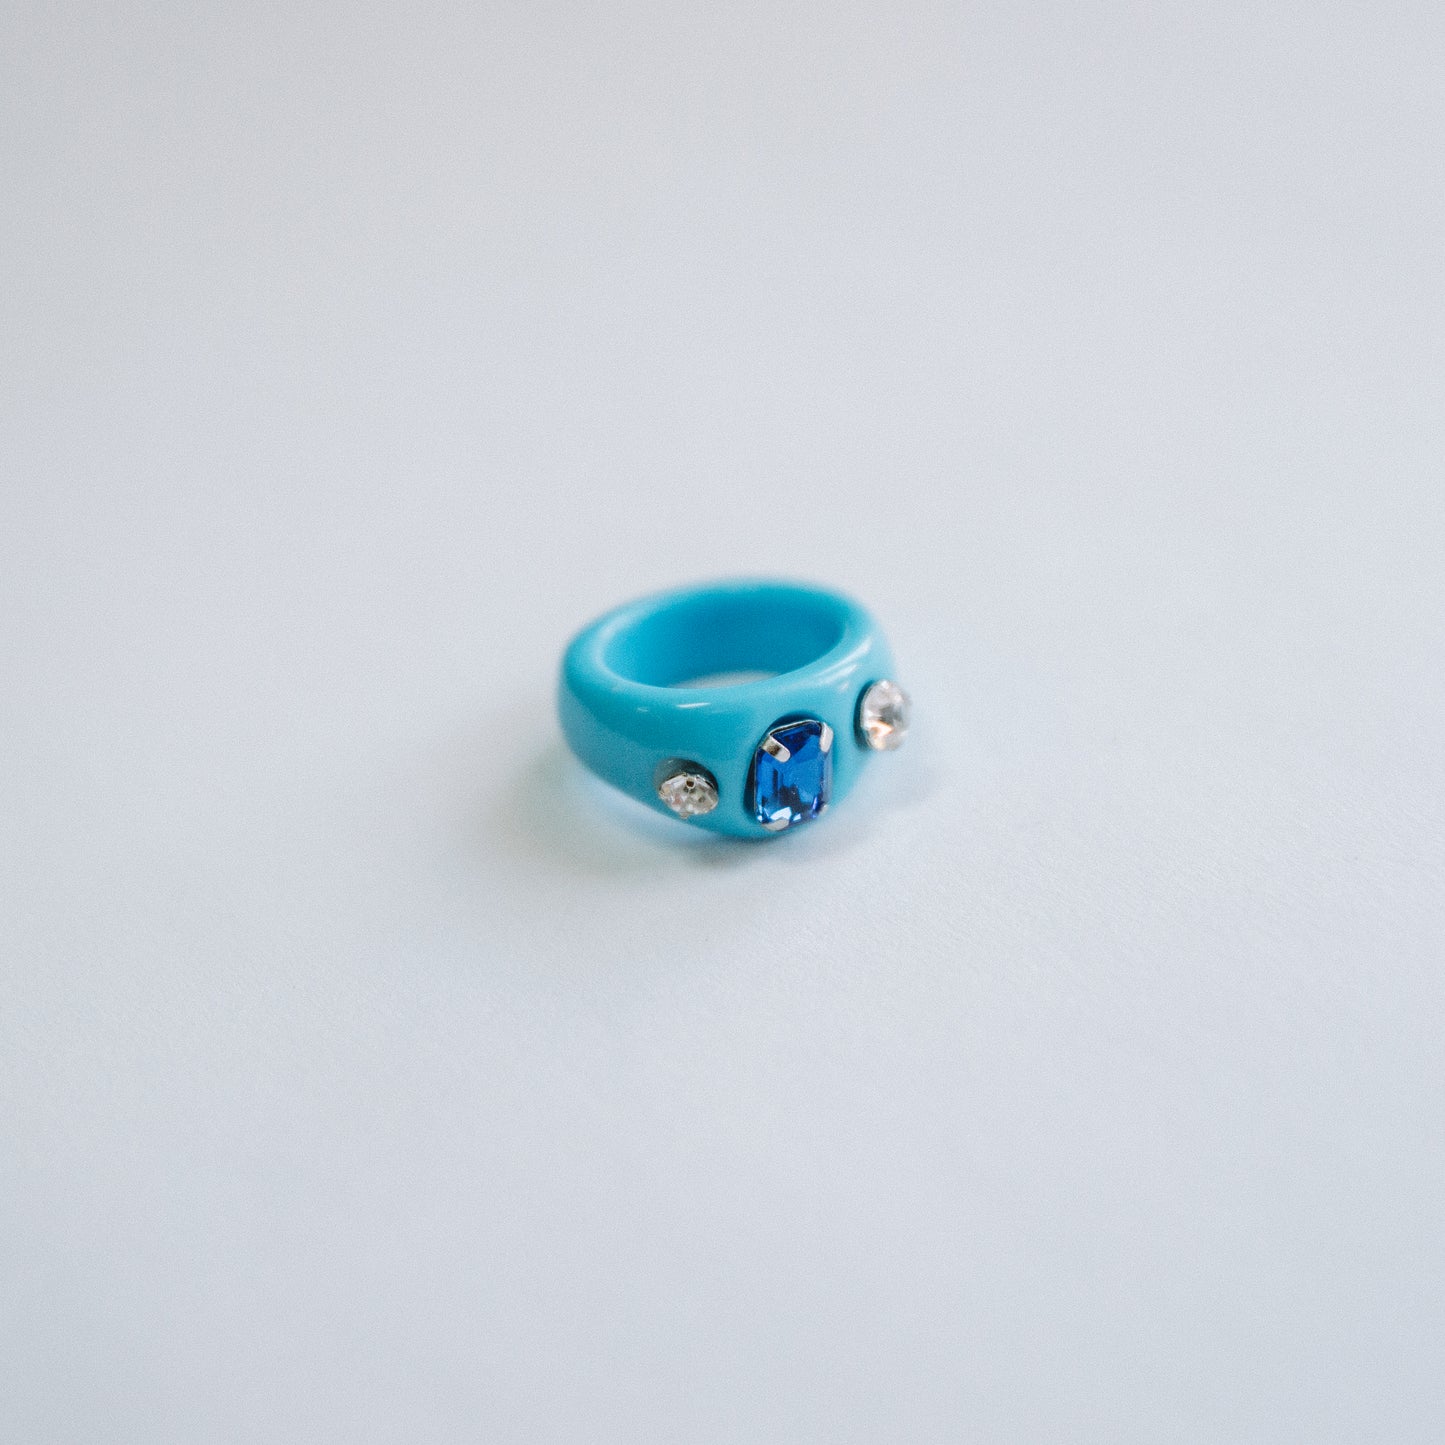 The Blue Resin Ring